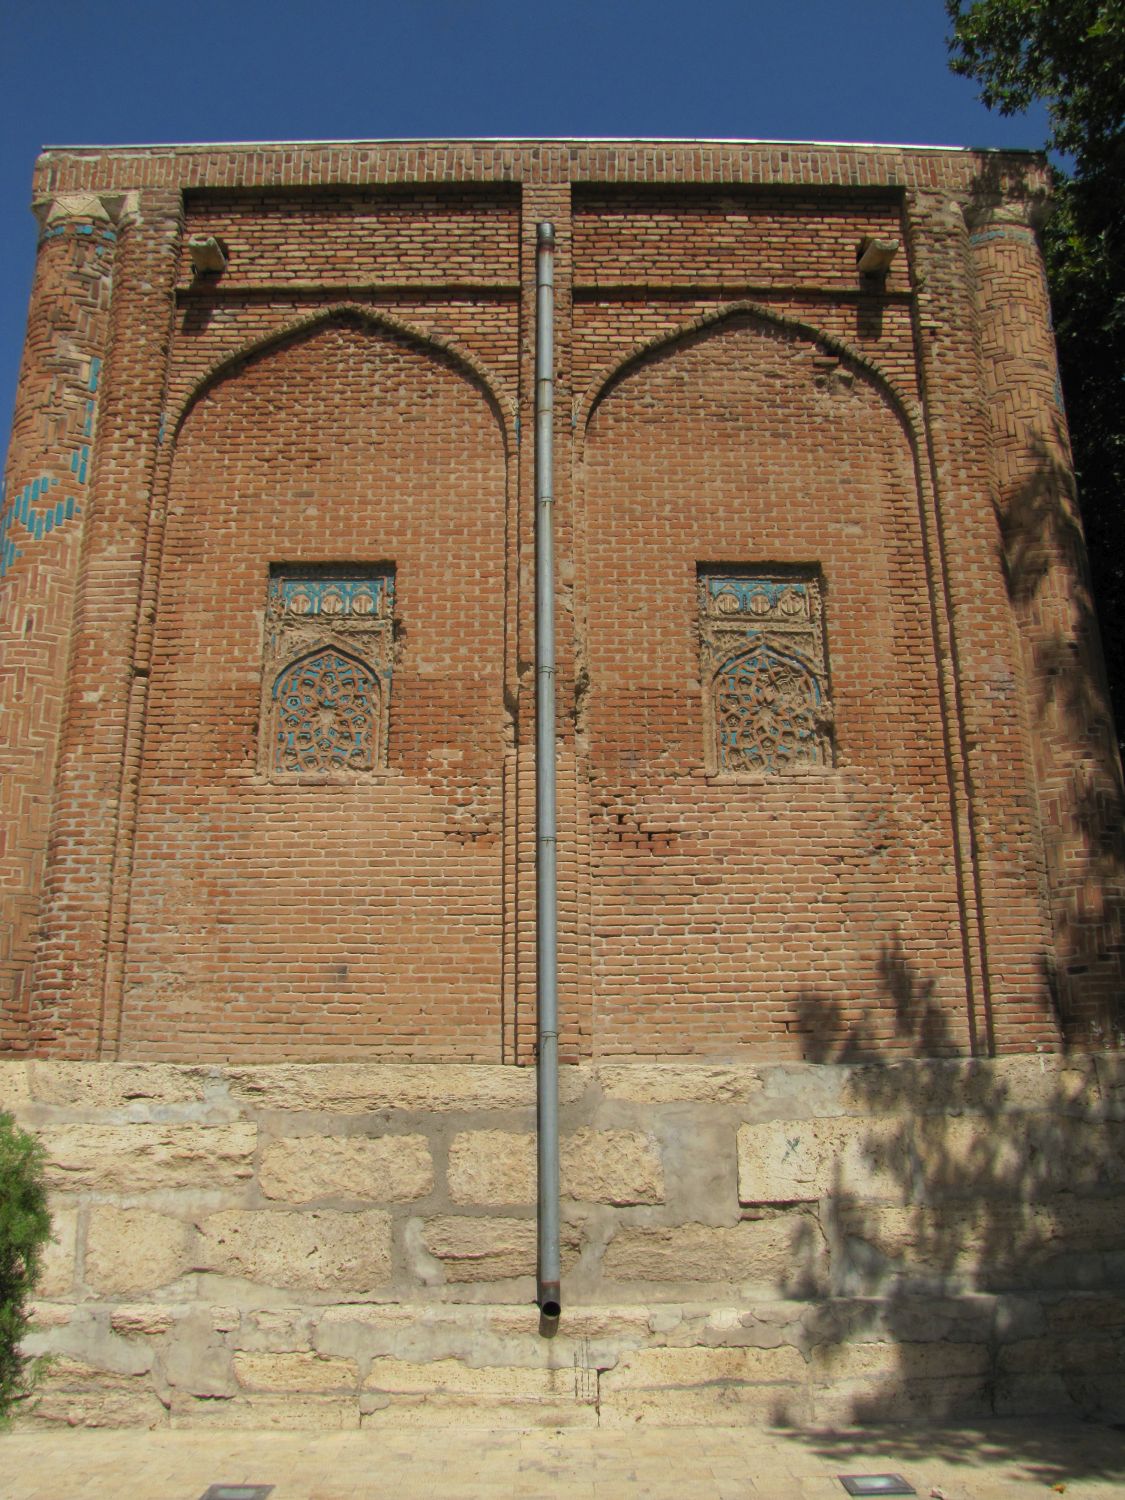 Exterior view, brick and stone back of tomb, blind arches with mosaic tile recessed panels